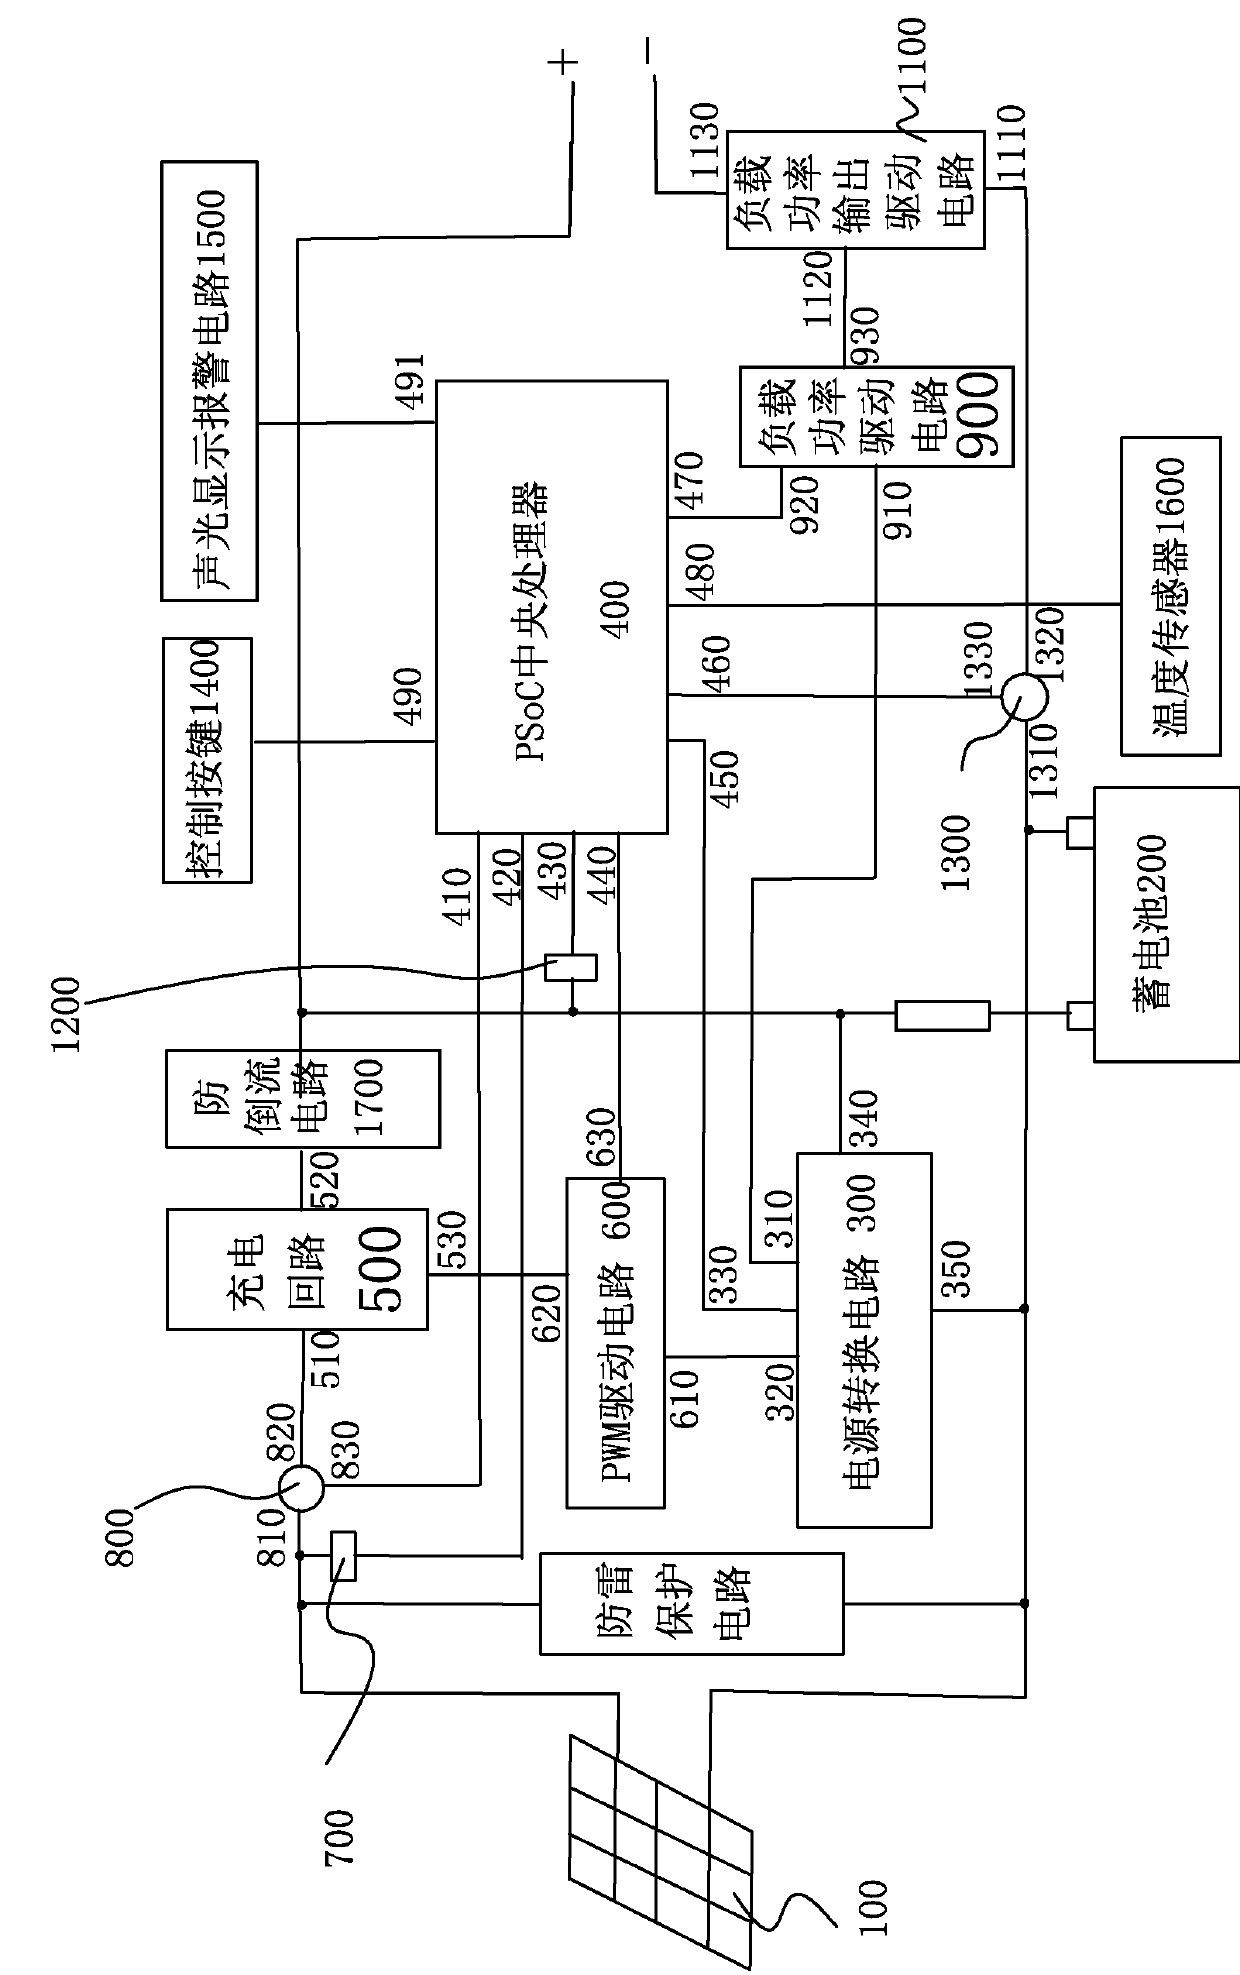 PSoC (Programmable System on Chip)-based MPPT (Maximum Power Point Tracking) type solar charge controller